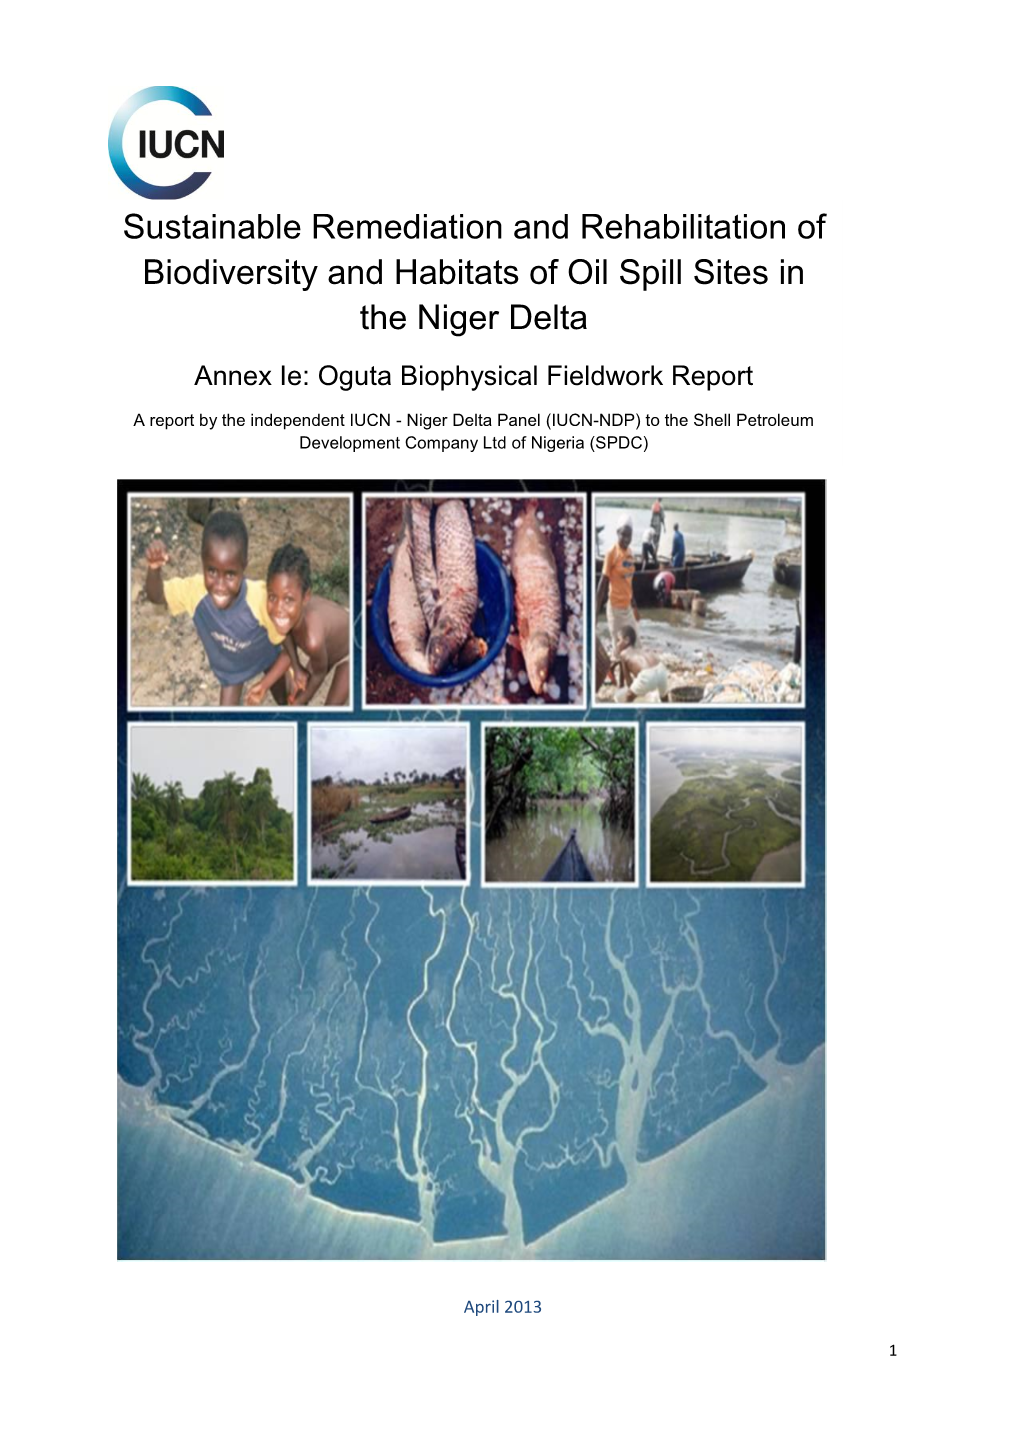 Sustainable Remediation and Rehabilitation of Biodiversity and Habitats of Oil Spill Sites in the Niger Delta